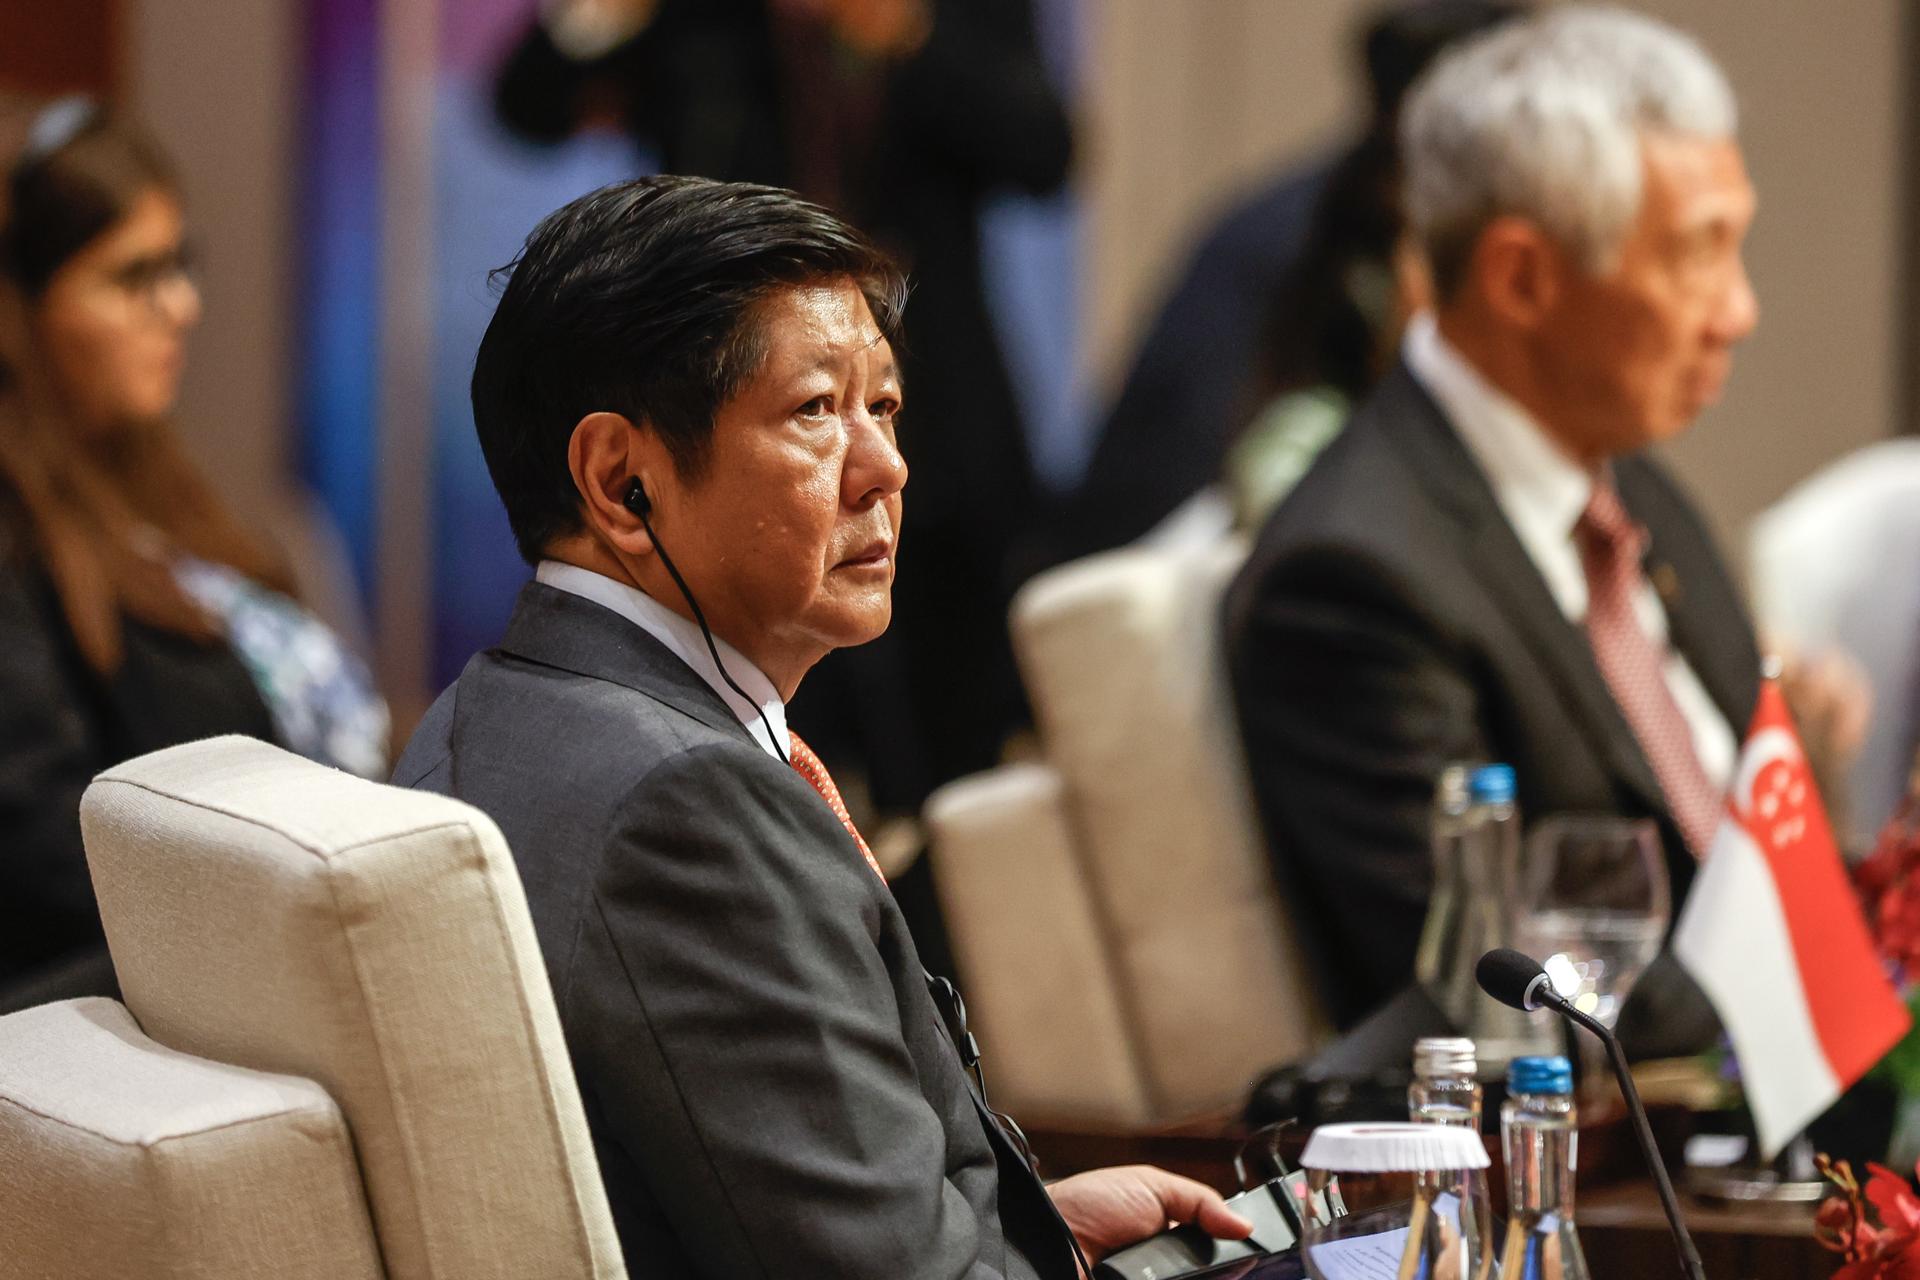 Philippines' President Ferdinand 'Bongbong' Marcos Jr. attends the retreat session of the 43rd Association of Southeast Asian Nations (ASEAN) Summit in Jakarta, Indonesia, 05 September 2023. EFE/EPA/MAST IRHAM/ POOL